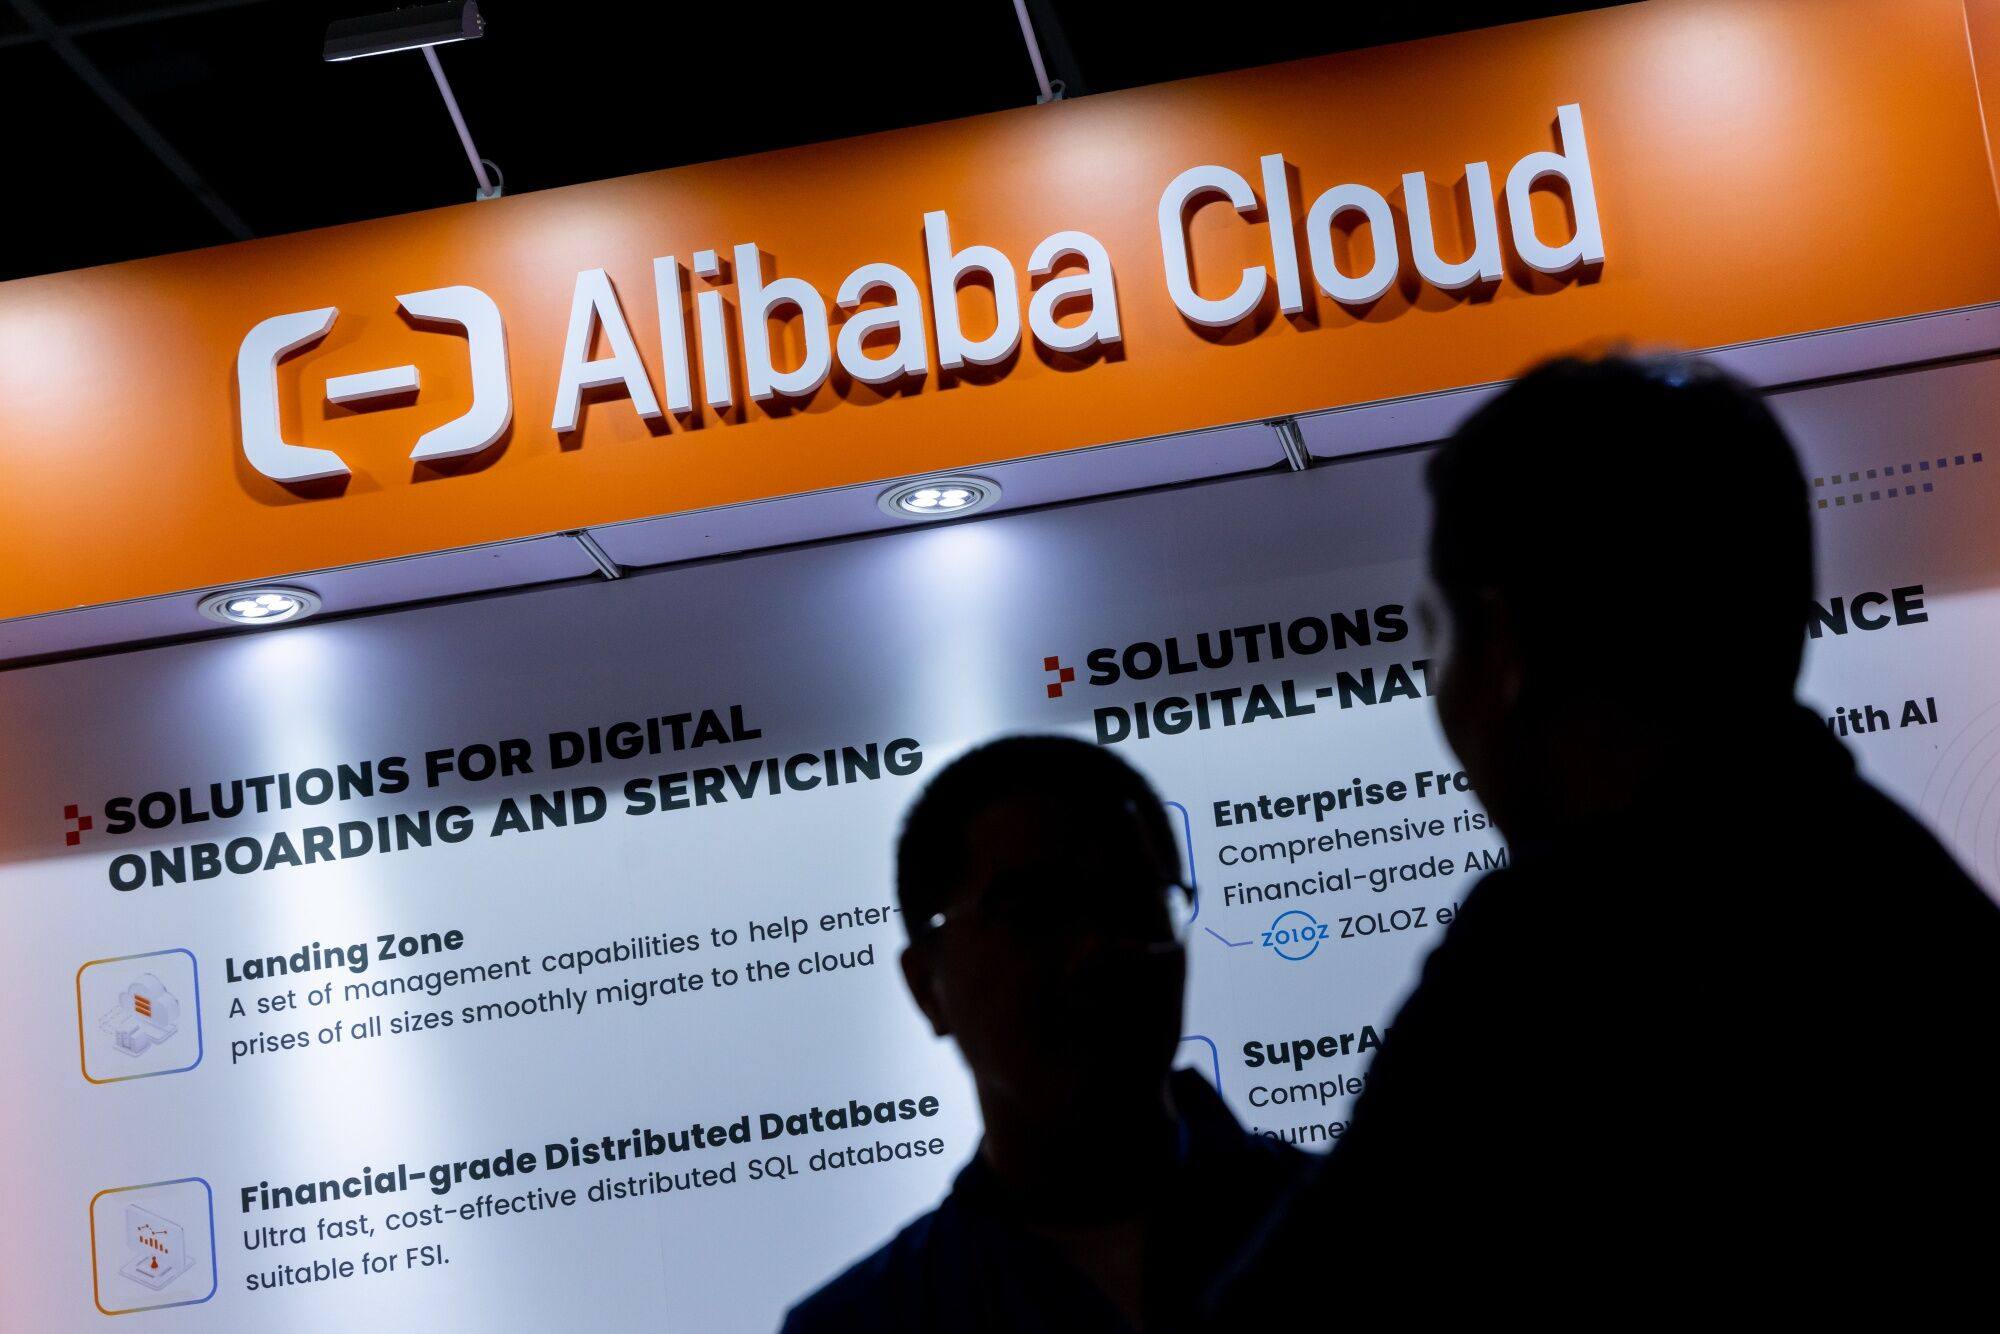 Alibaba Cloud’s latest initiative reflects the company’s efforts to attract more customers in major markets amid headwinds from geopolitical tensions. Photo: Bloomberg